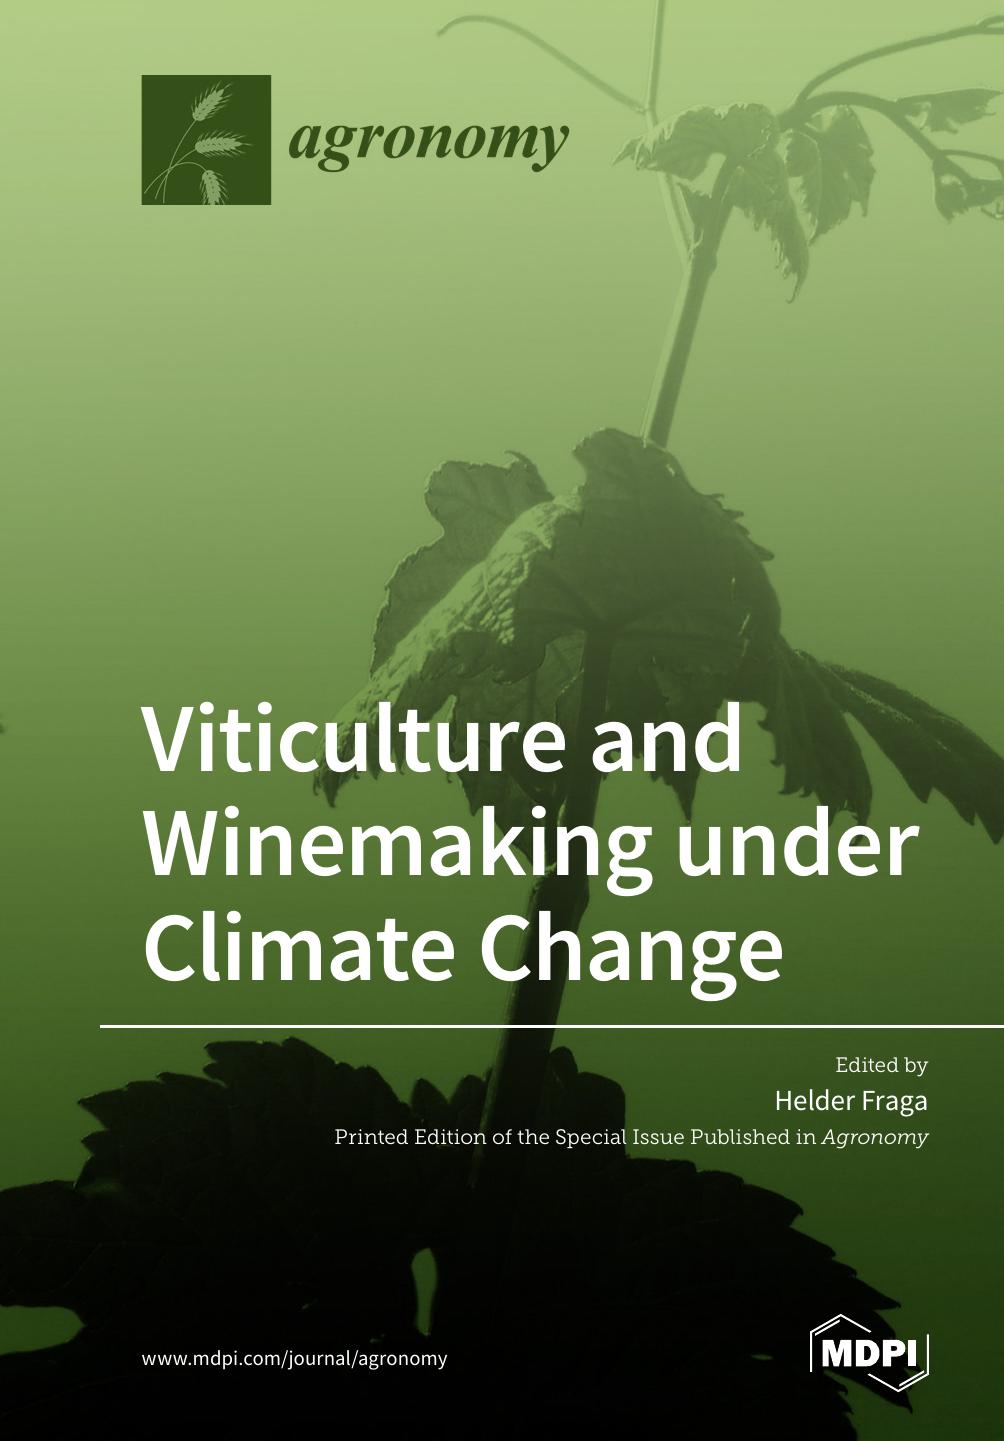 Viticulture and Winemaking under Climate Change by Helder Fraga